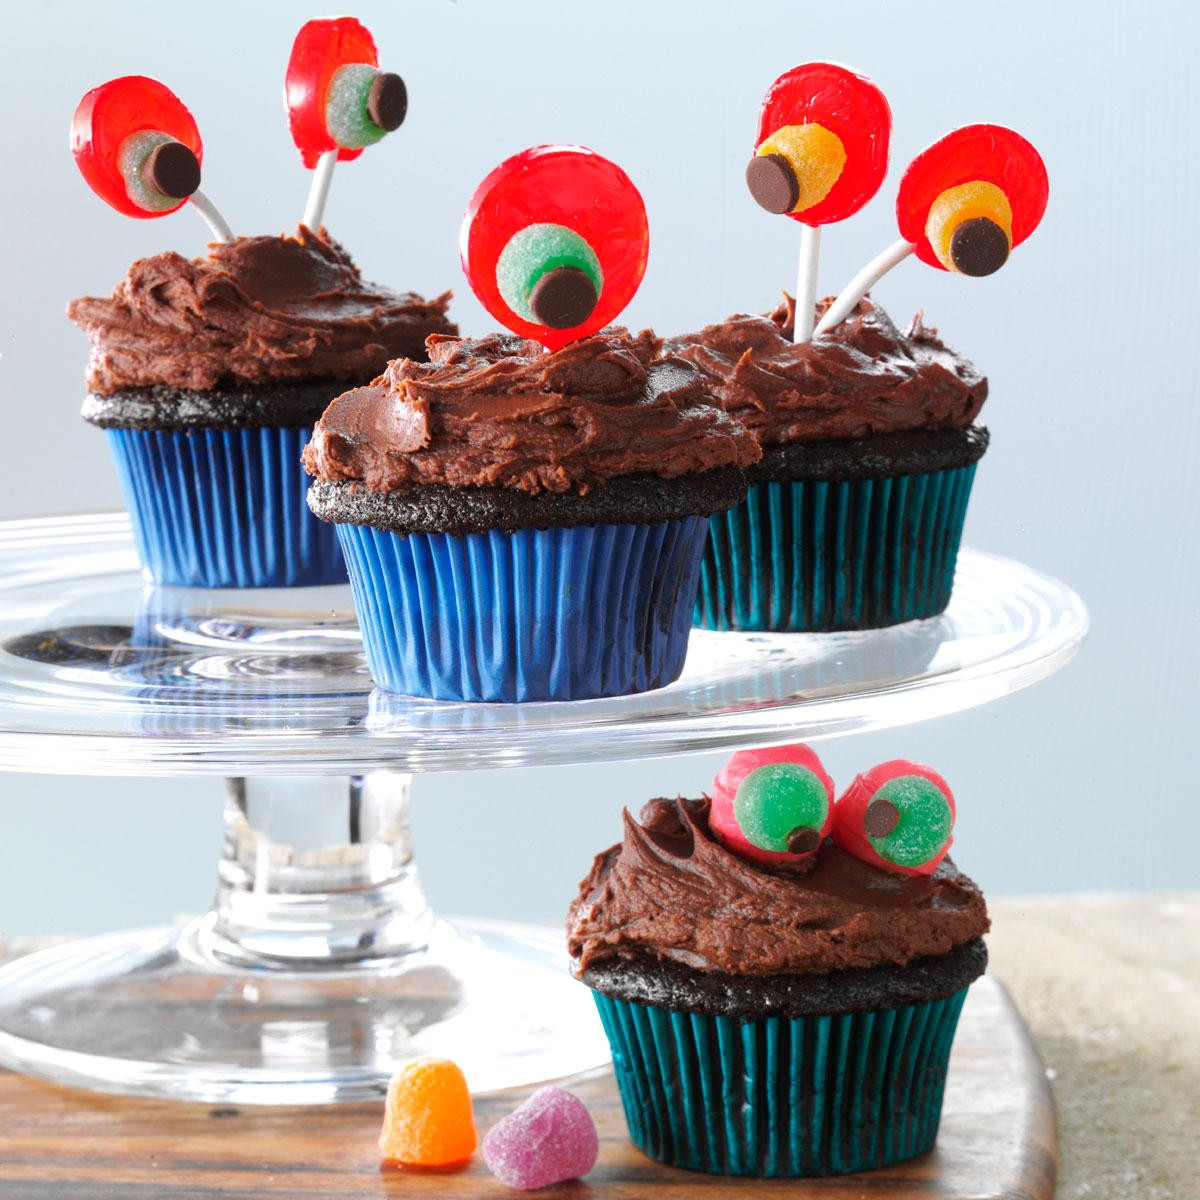 Recipes For Halloween Cupcakes
 Devil s Food Cupcakes with Chocolaty Frosting Recipe